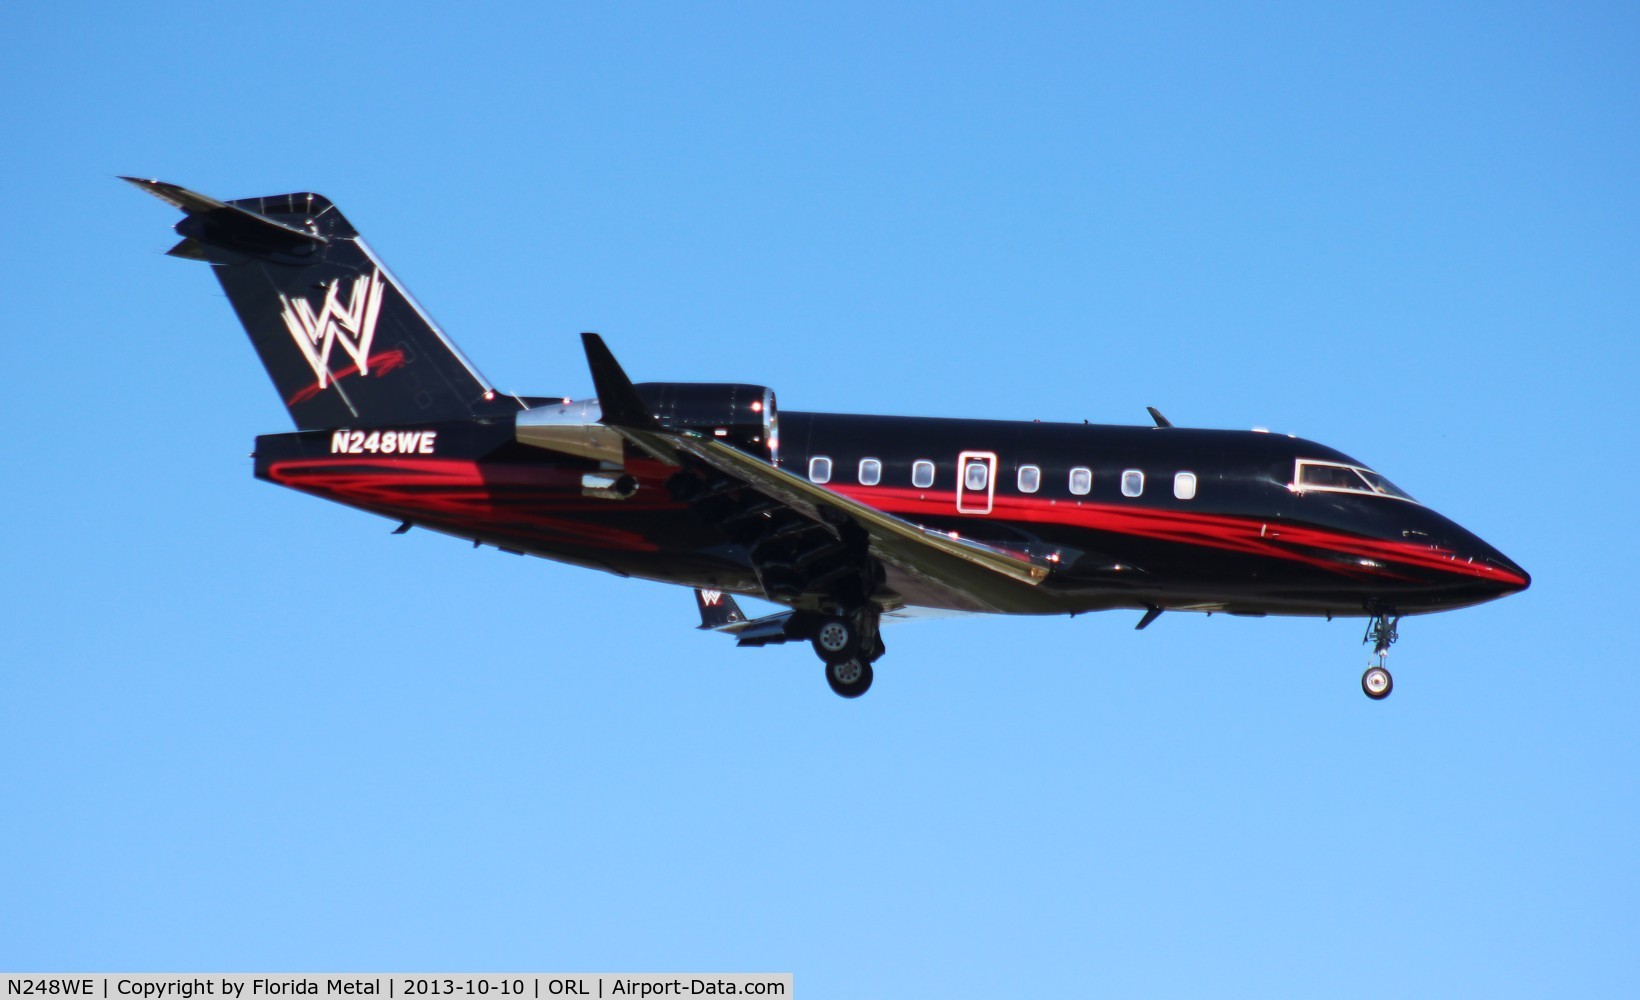 N248WE, 1998 Canadair Challenger 604 (CL-600-2B16) C/N 5369, WWE Wrestling Challenger 604, used to wear tail number N247WE - which now is on a Global 5000 owned by Vince McMahon's WWE